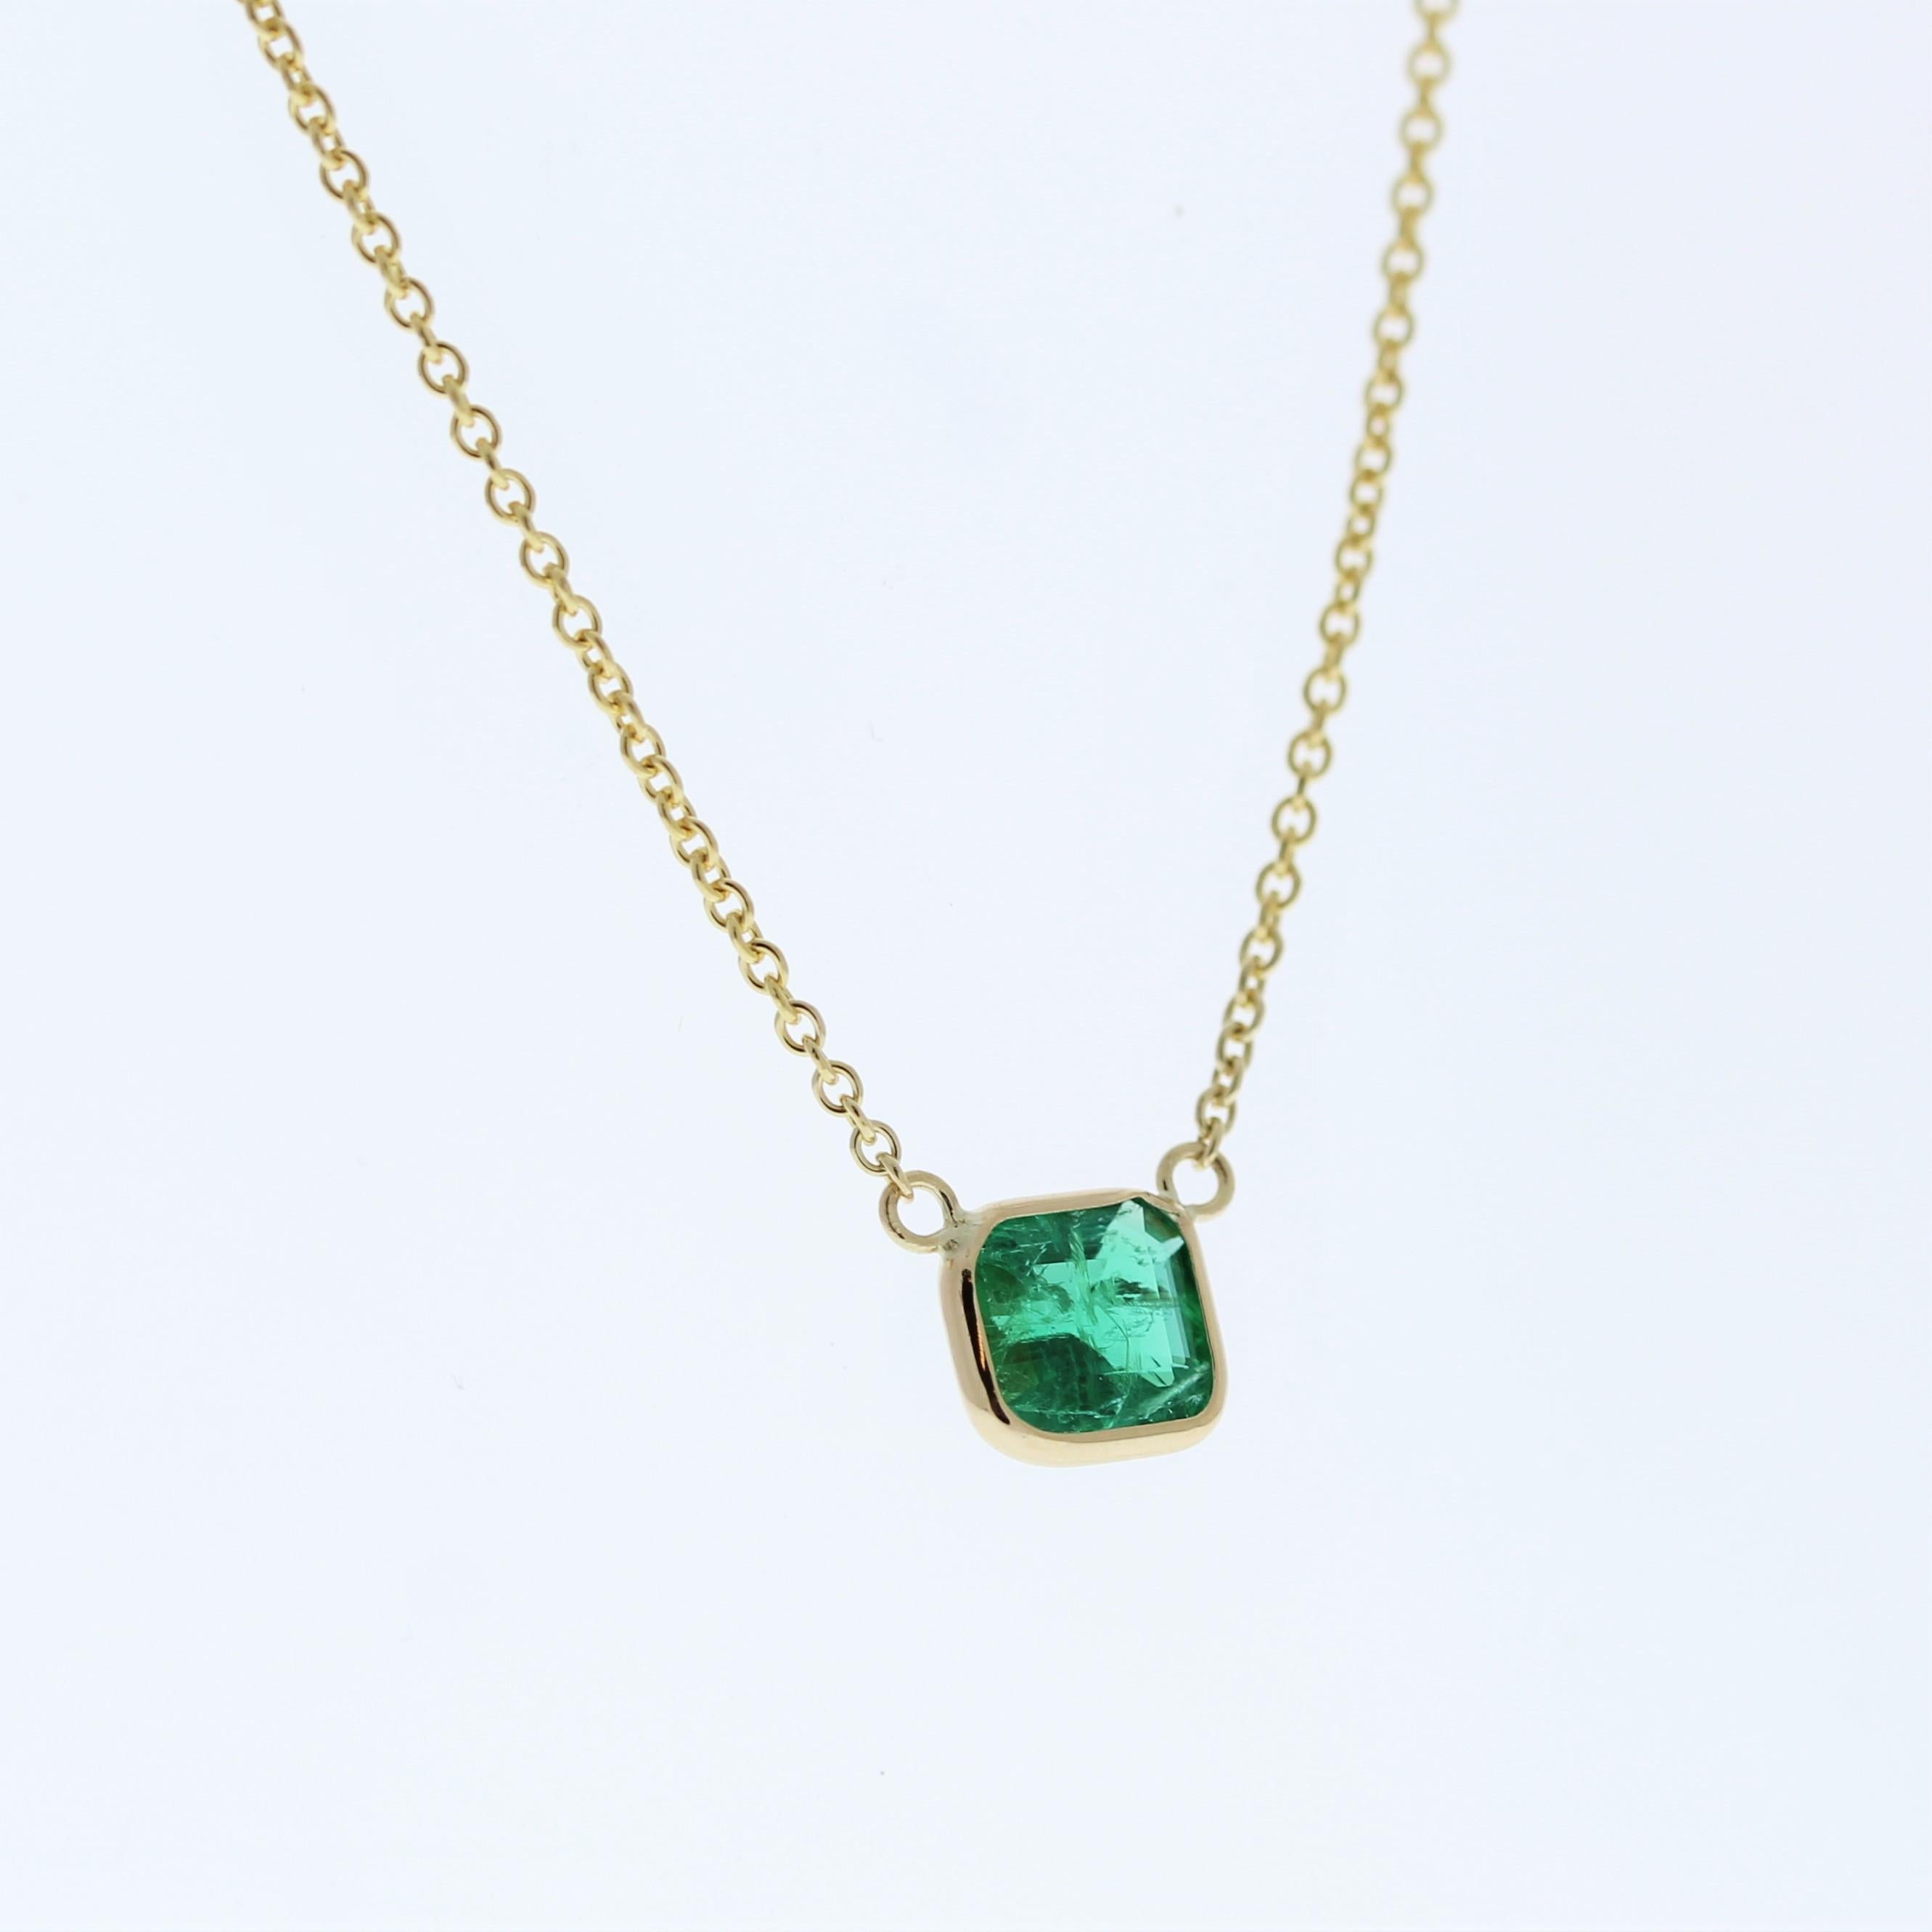 The necklace features a 0.94-carat Asscher-cut green emerald set in a 14 karat yellow gold pendant or setting. The Asscher cut and the vibrant green color of the emerald against the yellow gold setting are likely to create an elegant and